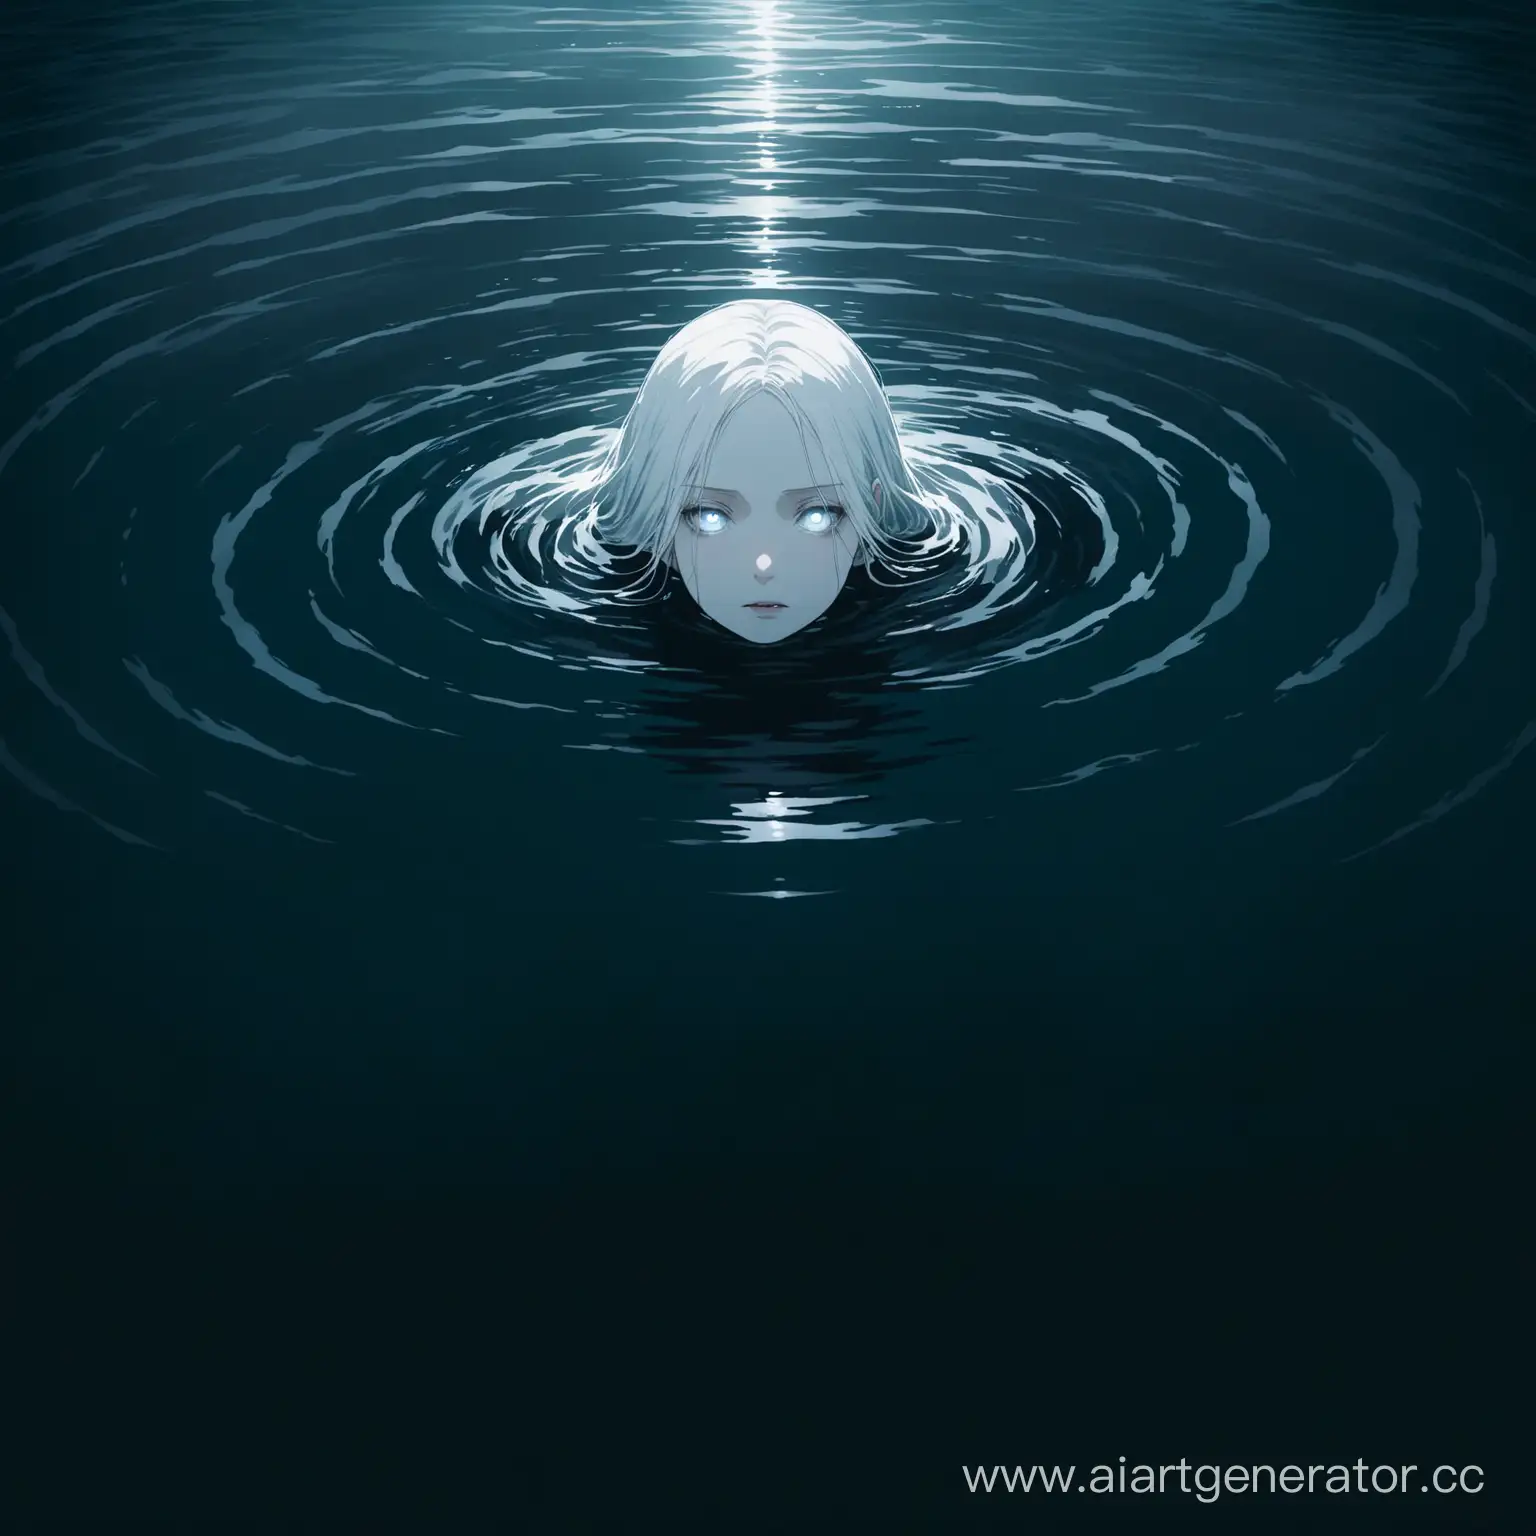 The image shows a dark body of water at night. In the center of the frame, a figure resembling a woman with long white hair and pale skin emerges from the water. Her expression is serious and her eyes are looking directly at the viewer. The water around her is still and reflects her image. The overall atmosphere of the image is eerie and mysterious